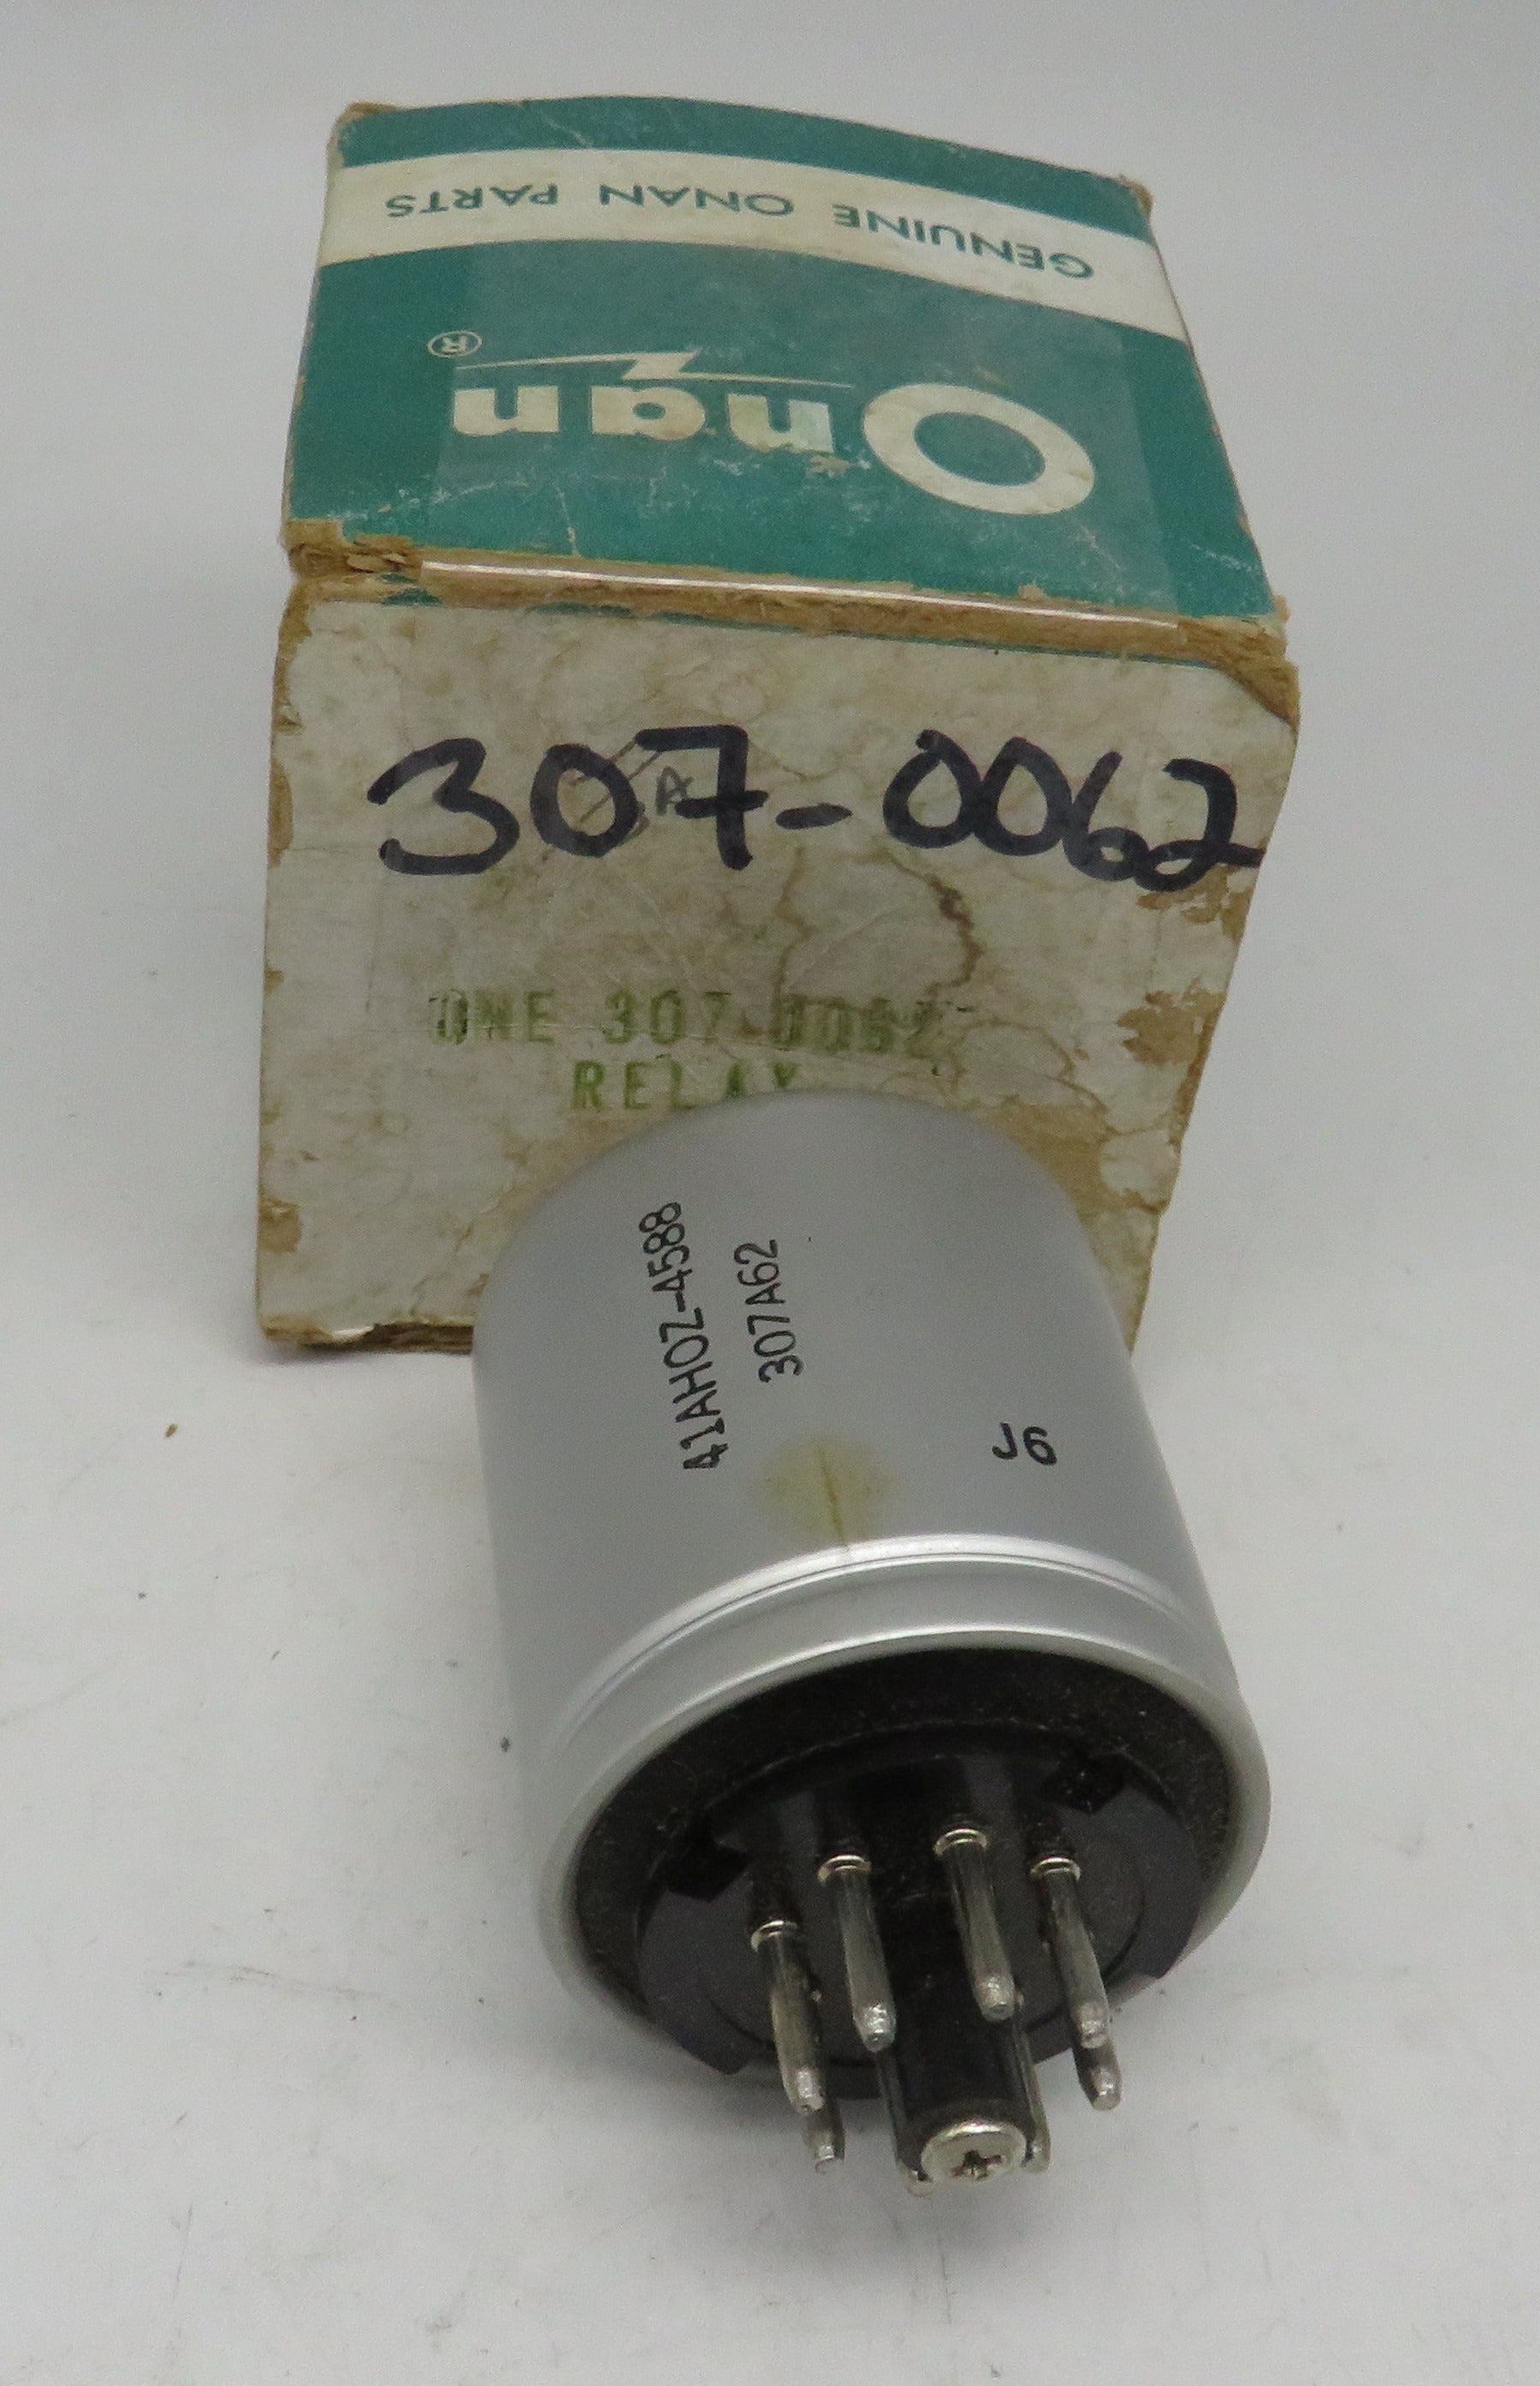 307-0062 Onan Relay For MCCK (Spec A-G) OBSOLETE 